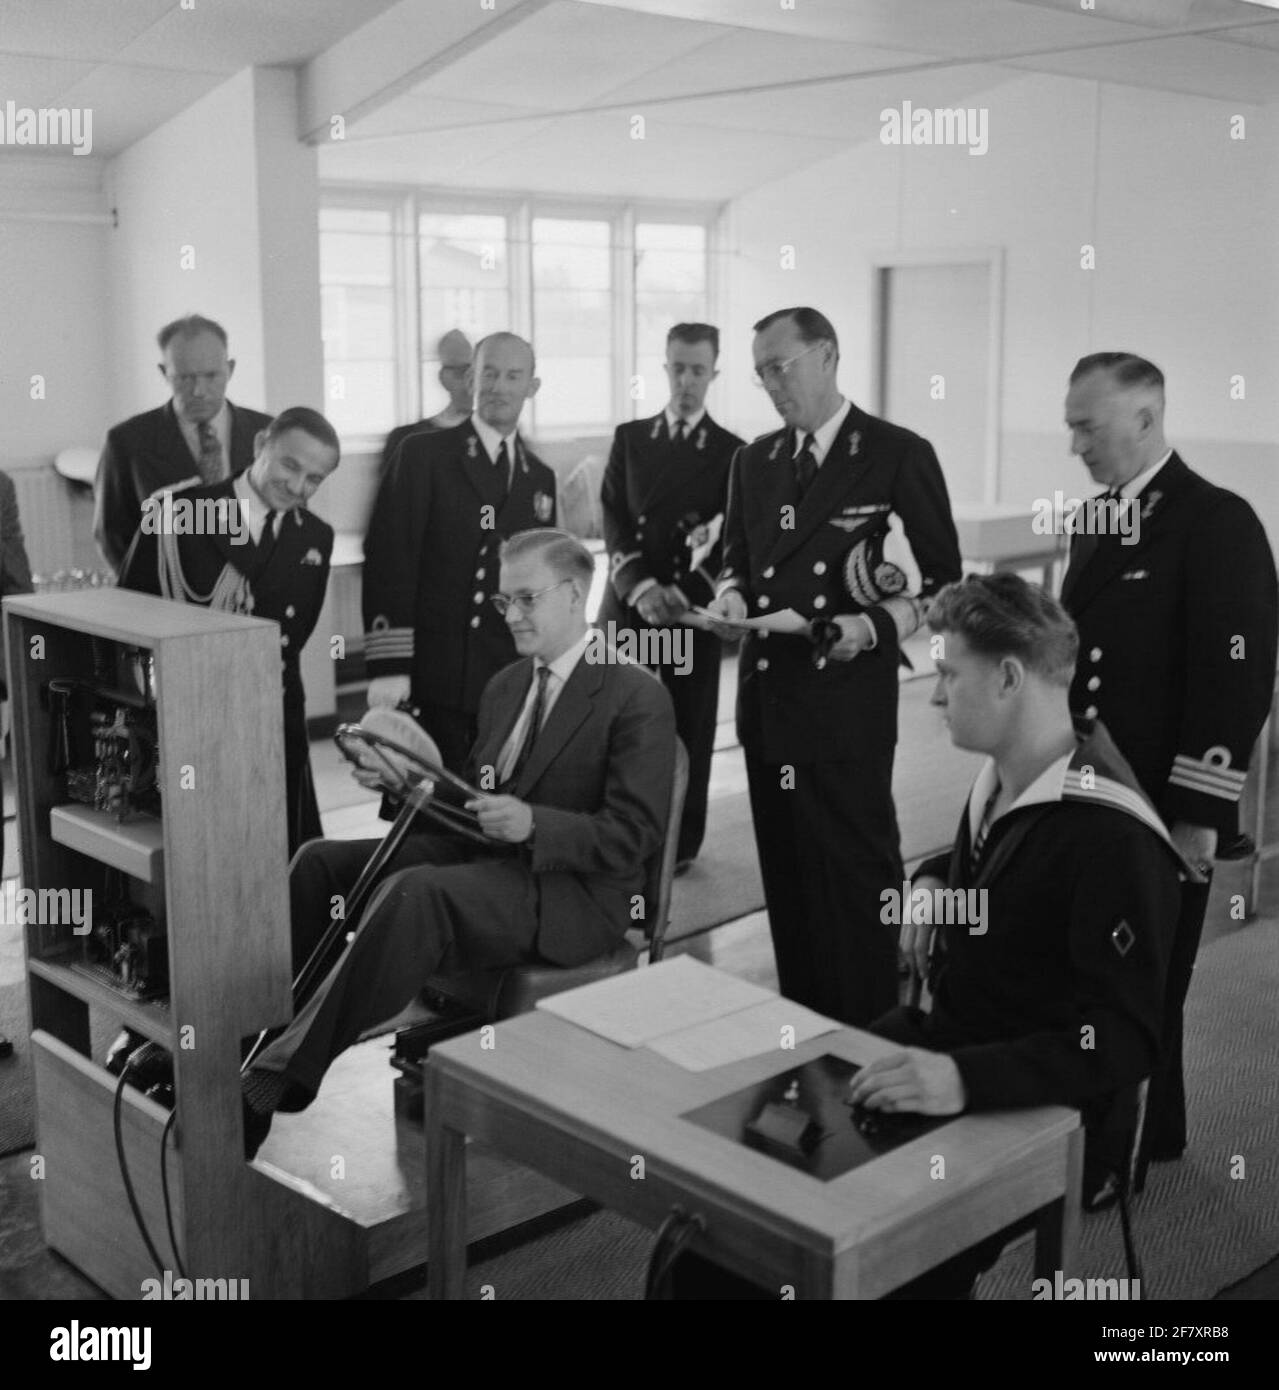 Working visit (in his capacity as Inspector General of the Royal Netherlands) of ZKH Prins Bernhard (1911-2004, third from the right) at the Marine Opinion Center (MOC) in Voorschoten, 1957. Stock Photo